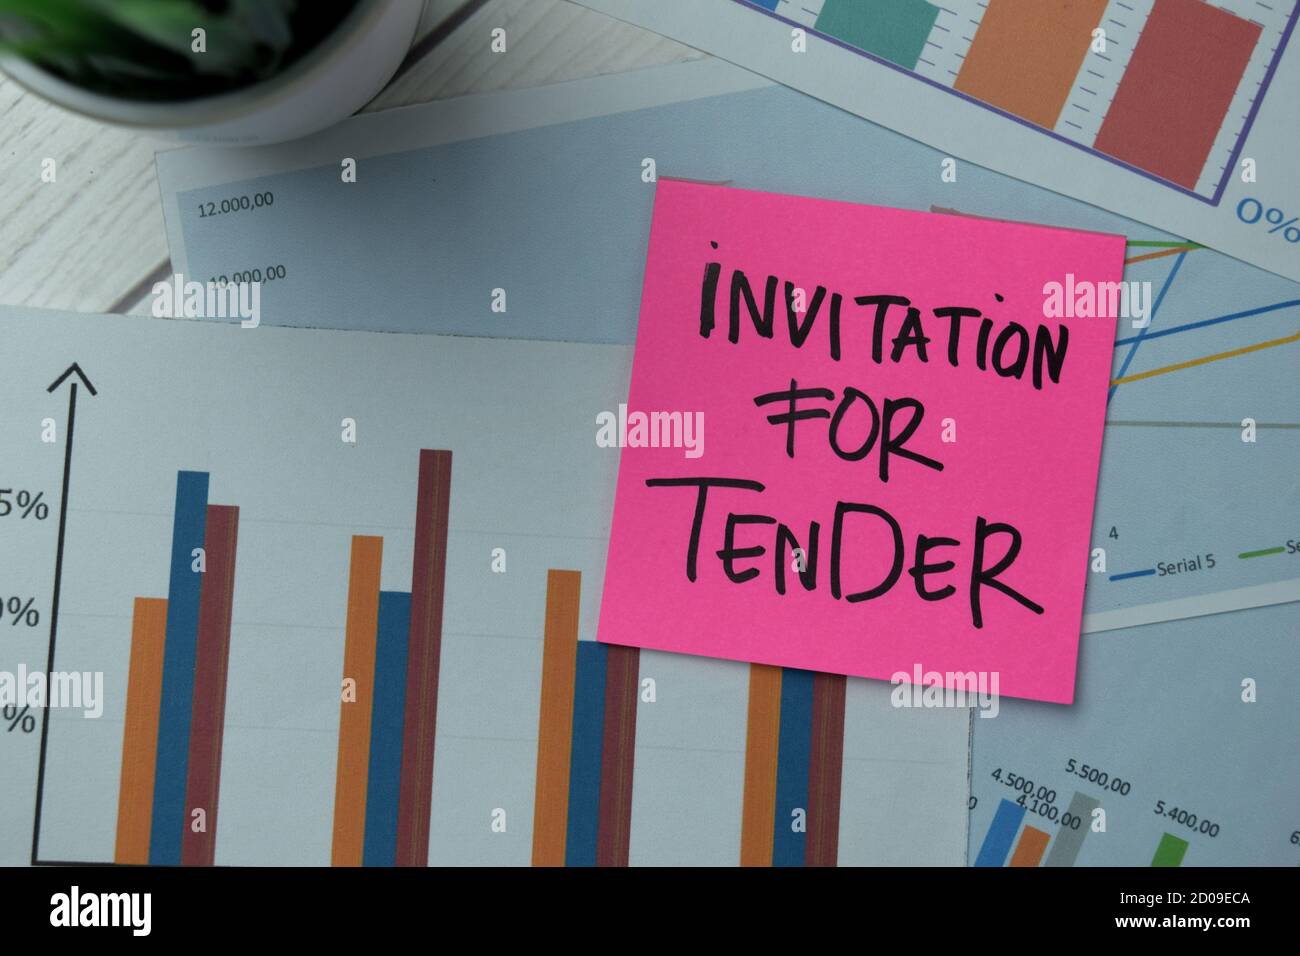 Invitation For Tender write on sticky notes isolated on office desk. Stock Photo